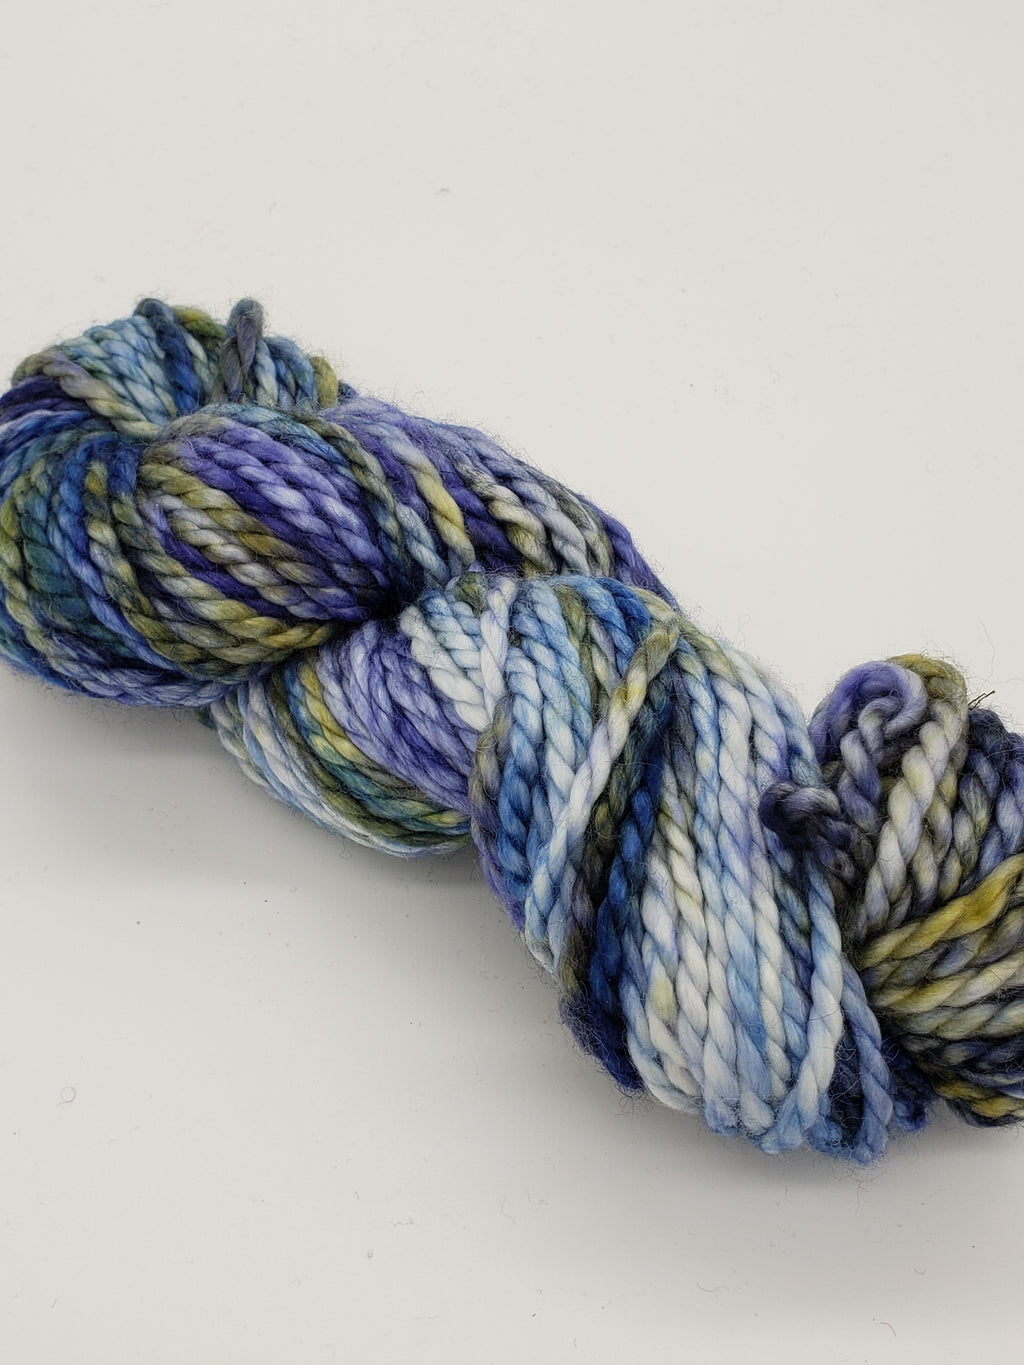 STARRY NIGHT - BIG TWISTY 2 PLY -  Hand Dyed Shades of Blue, Yellow and Cream Chunky Yarn for Rug Hooking - RSS227